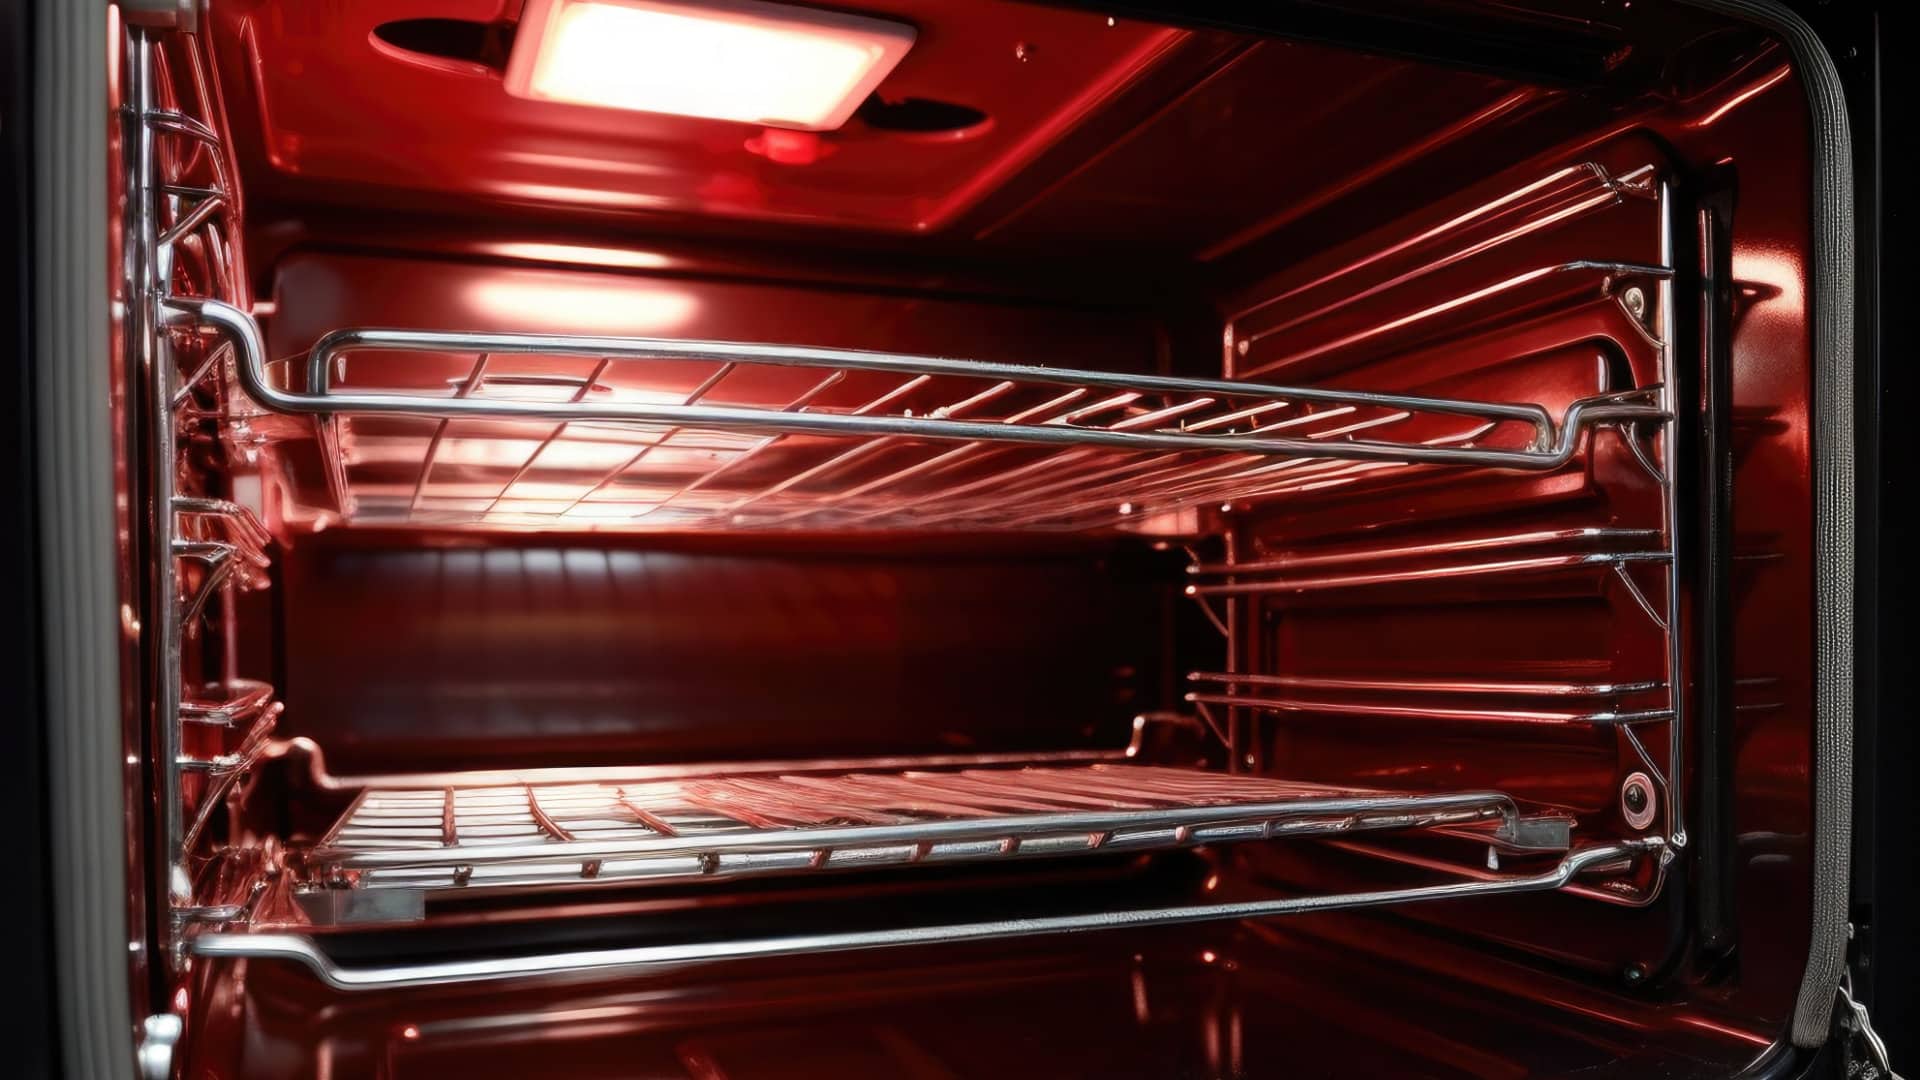 Featured image for “Self-Cleaning Oven Function: 4 Reasons Not to Use It”